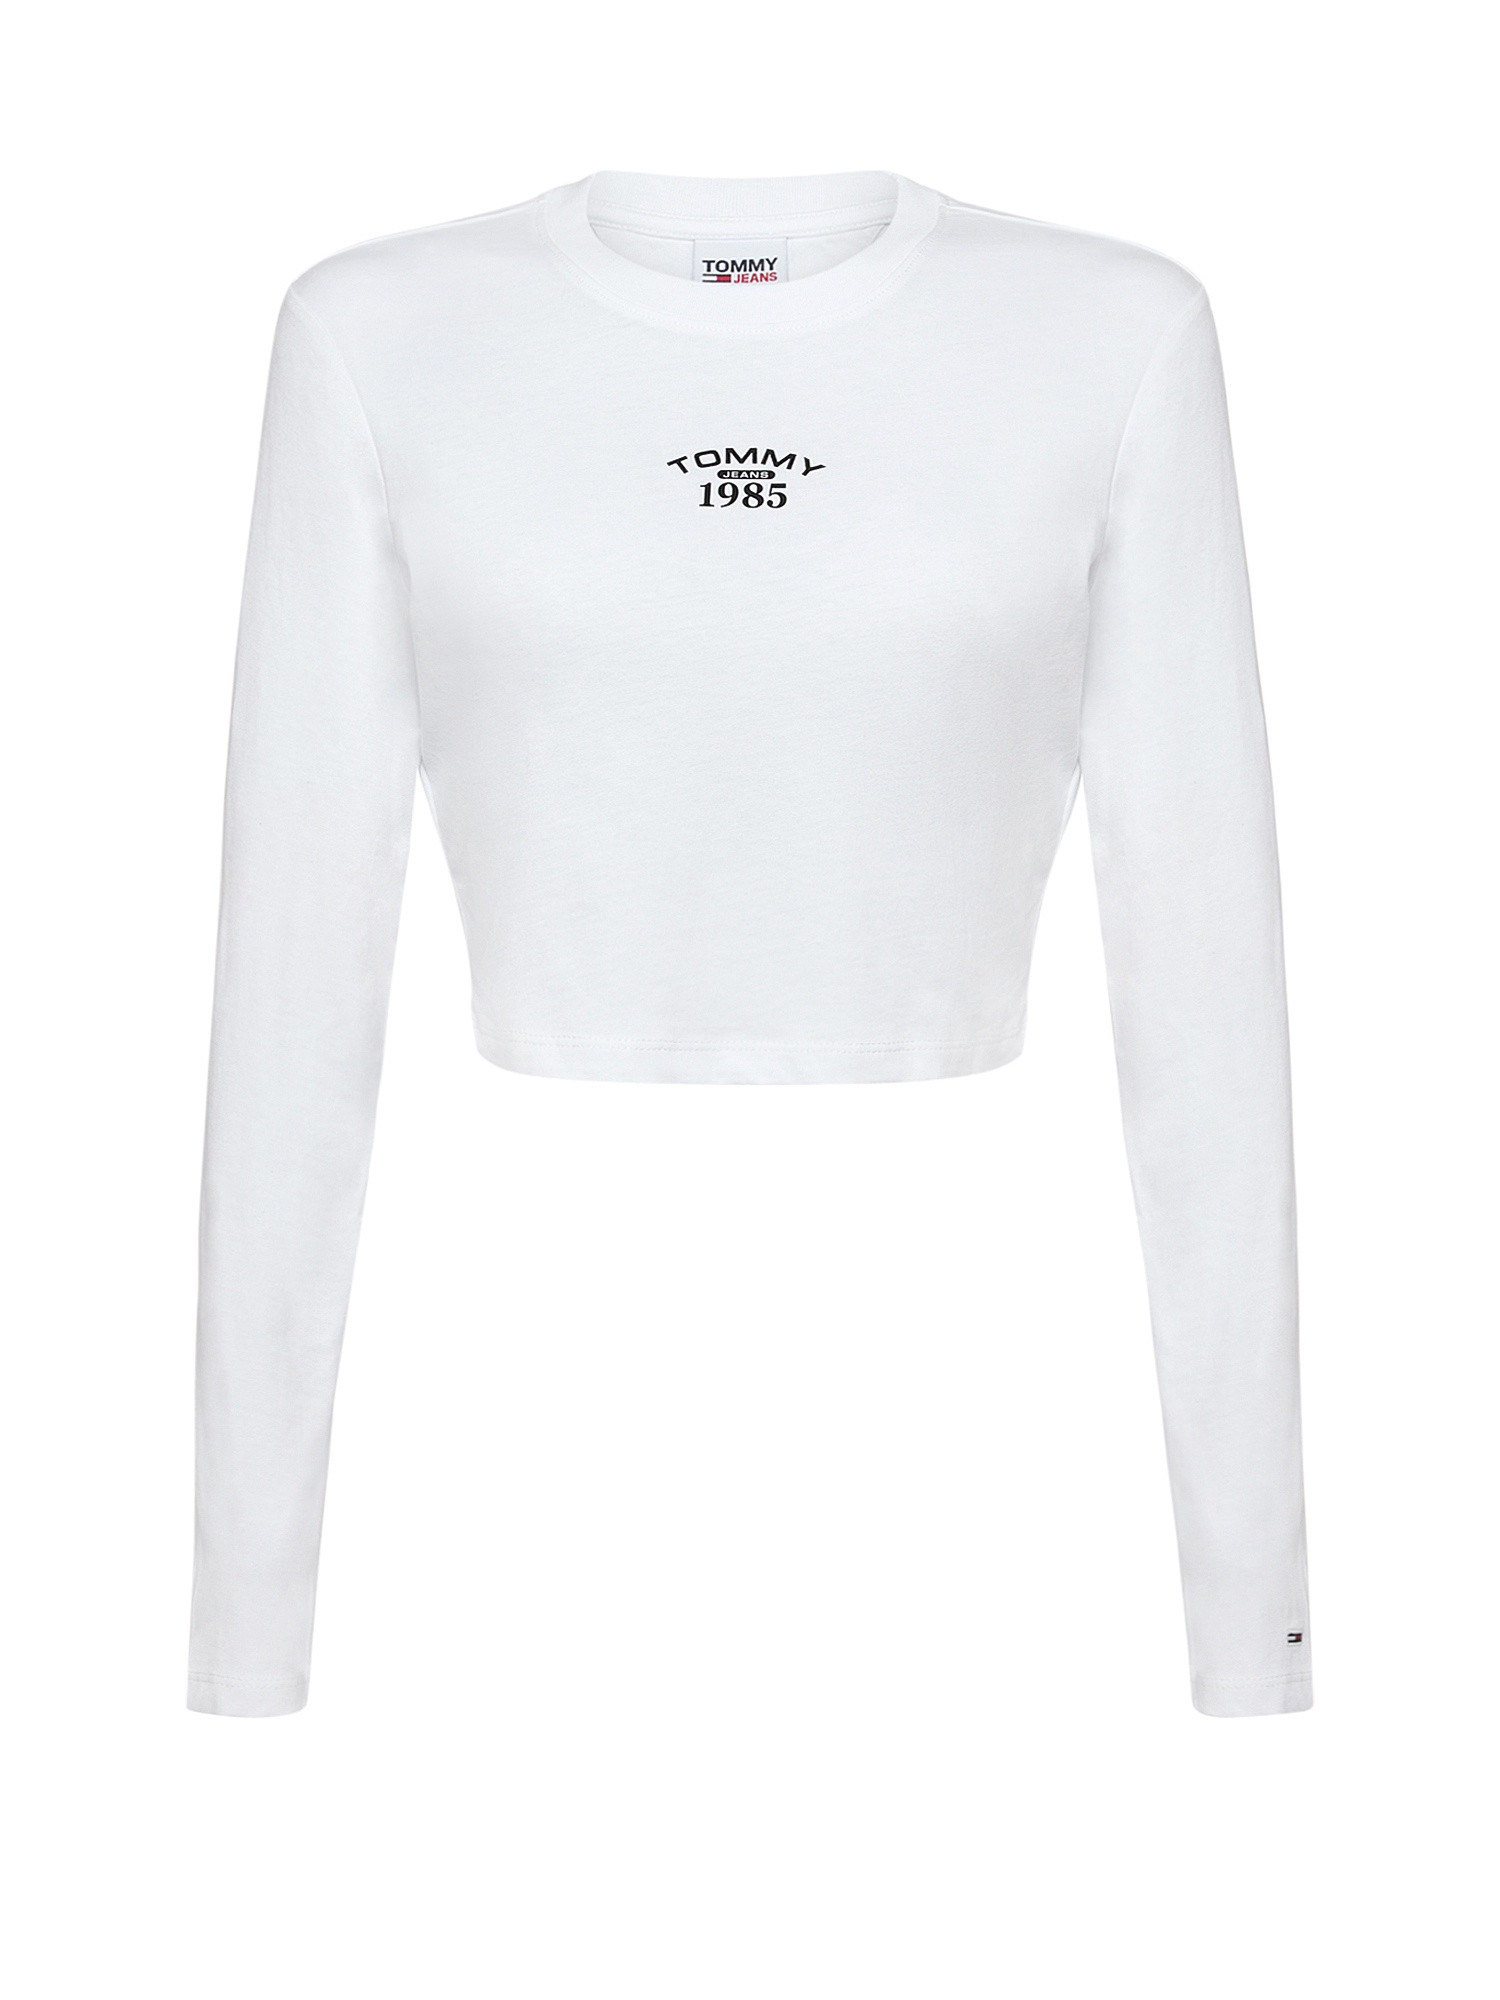 Tommy Jeans - Cotton crop top with logo, White, large image number 0